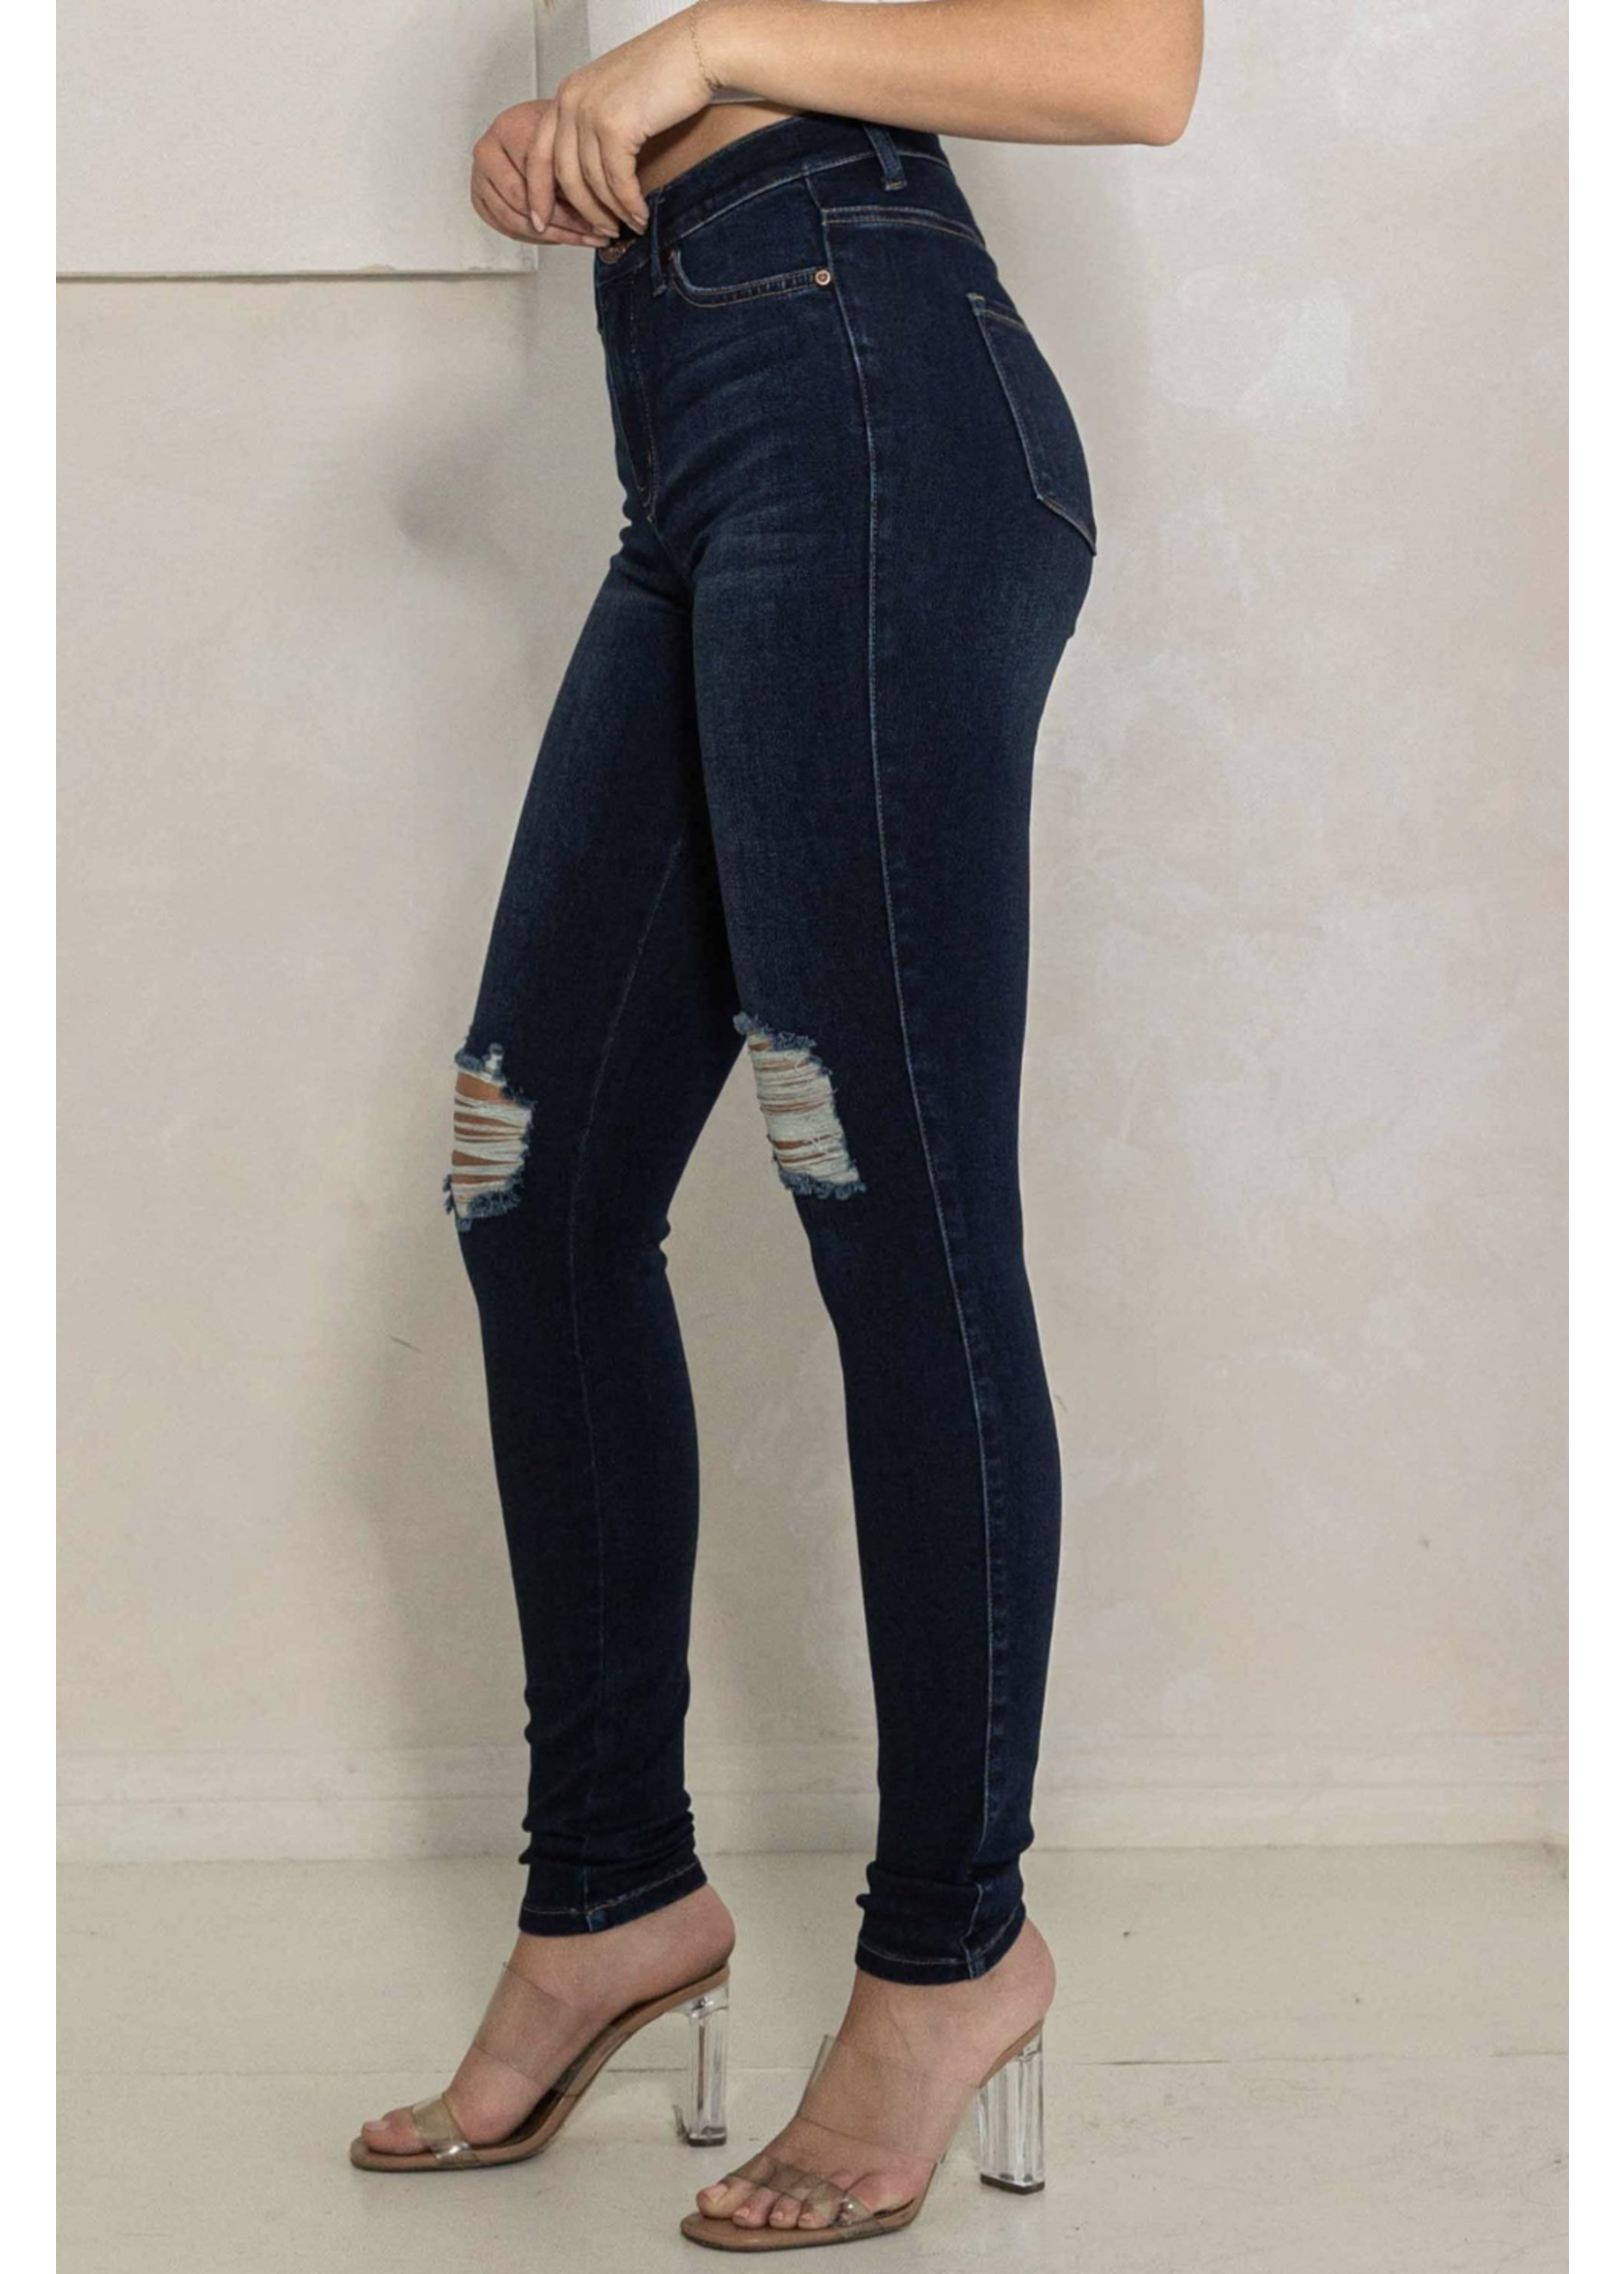 Classic Beauty Booty Jeans